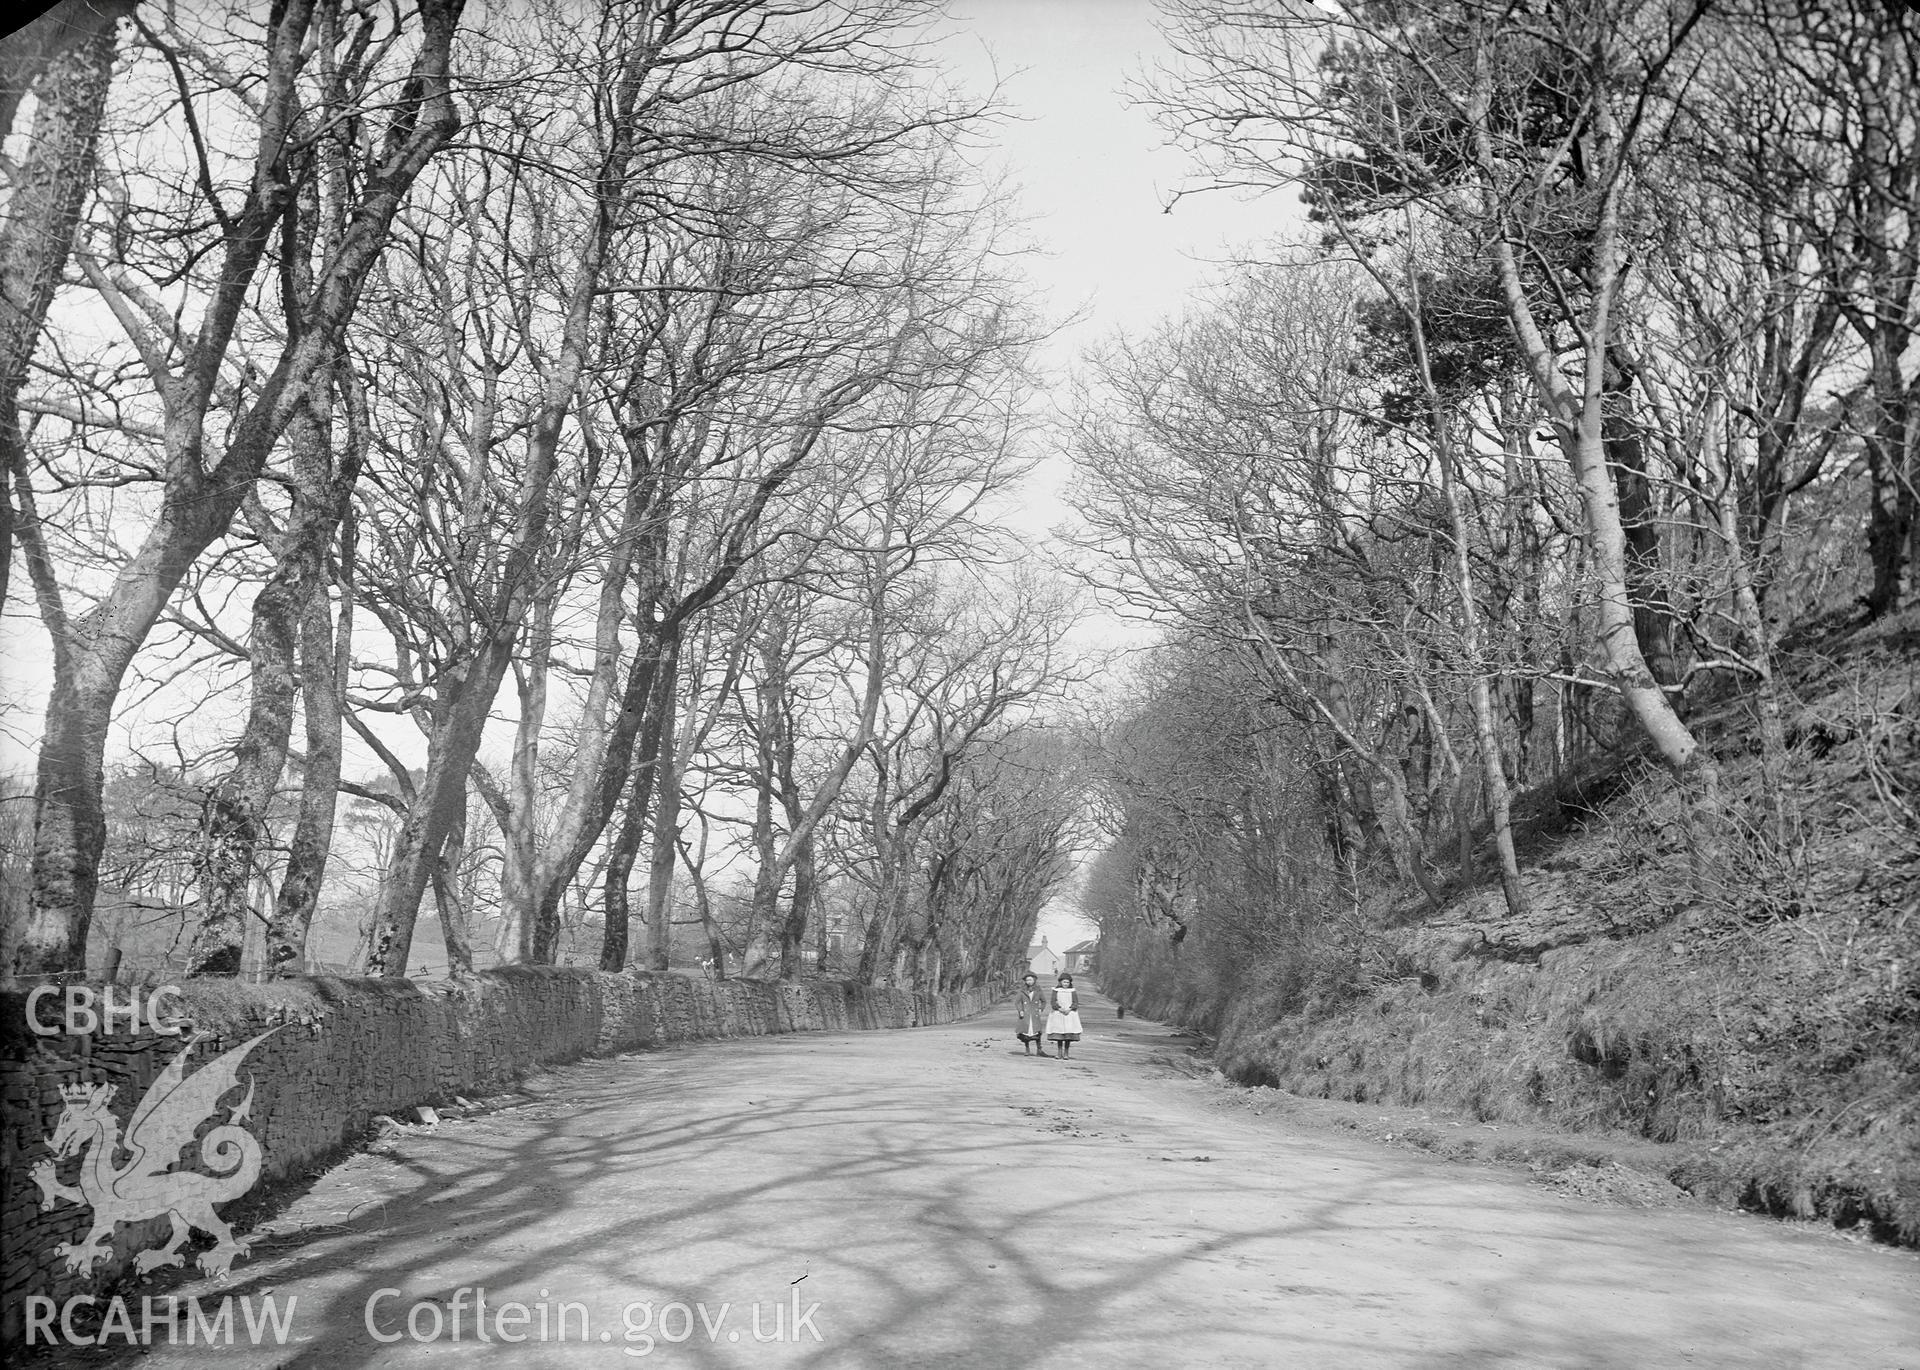 Black and white image dating from c.1910 showing the A487 at Southgate,  taken by Emile T. Evans.